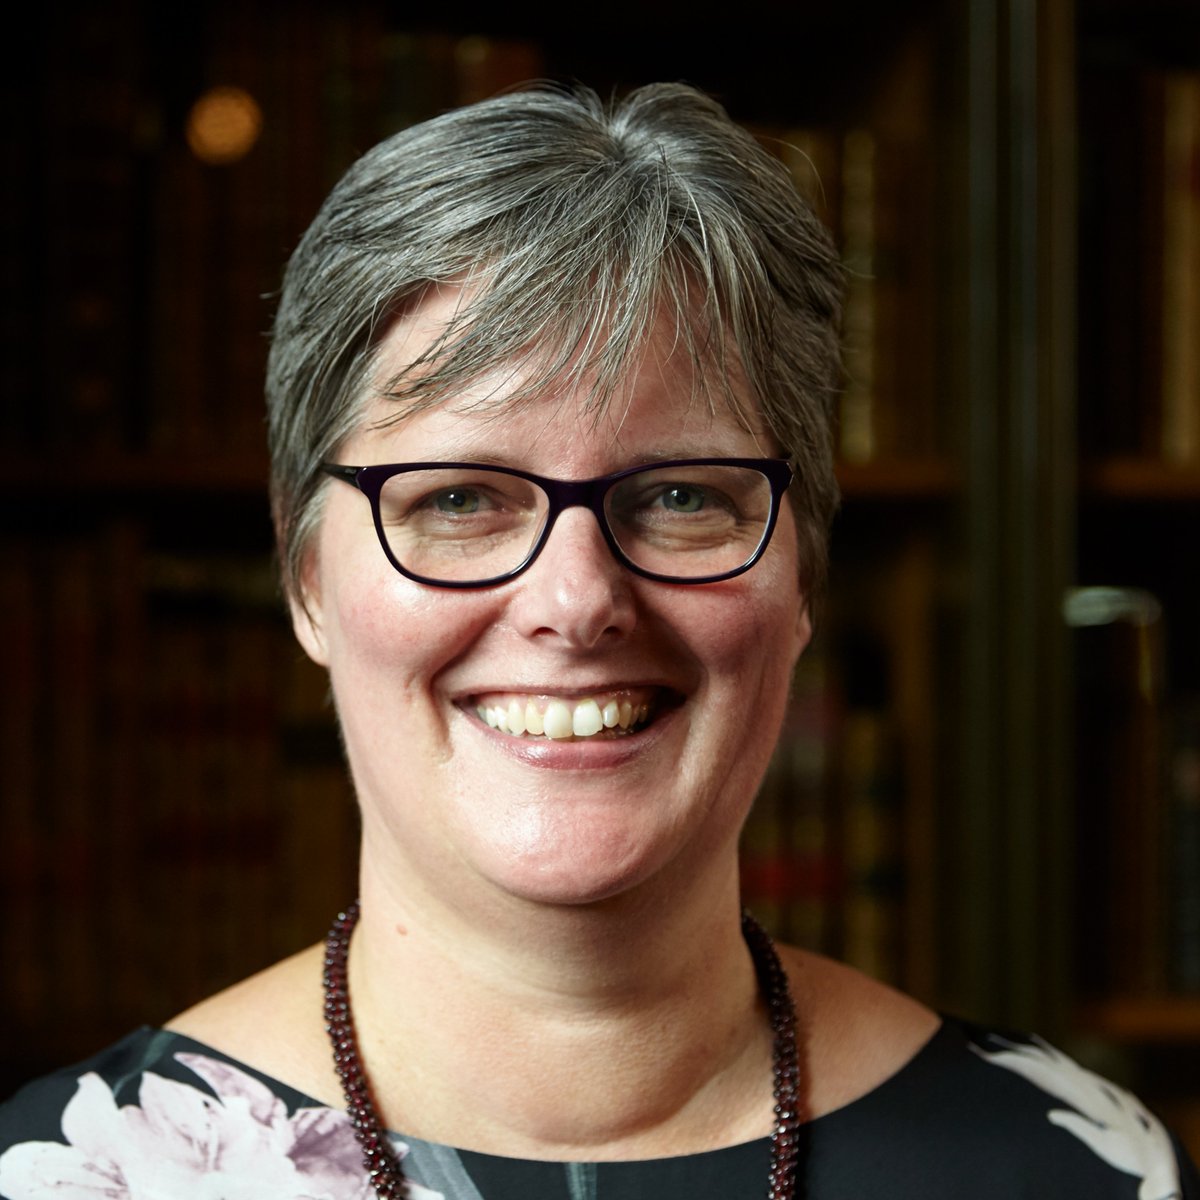 We’re thrilled to announce @simps_julianne will be our new Librarian from May 2024! On accepting the appointment, Julianne said: “The Library is an extraordinary slice of history and it’s an honour to be part of its future...' Read more in our blog library.chethams.com/blog/new-libra…